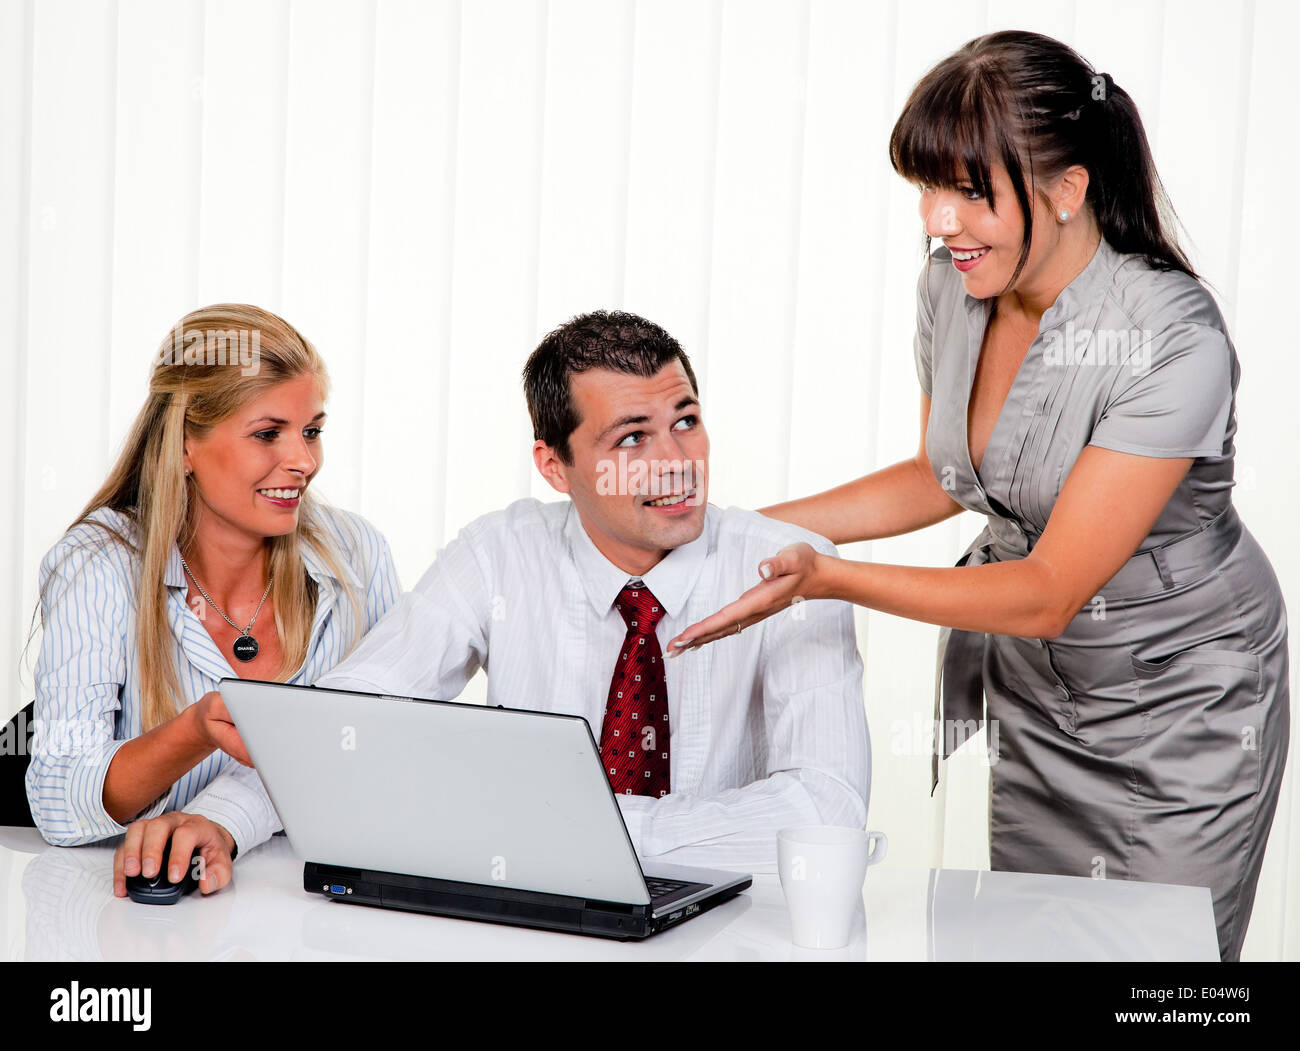 .Work worker colleague talent concepts discussion business office boss inspiration Imaginatively emotion emotions invention succ Stock Photo